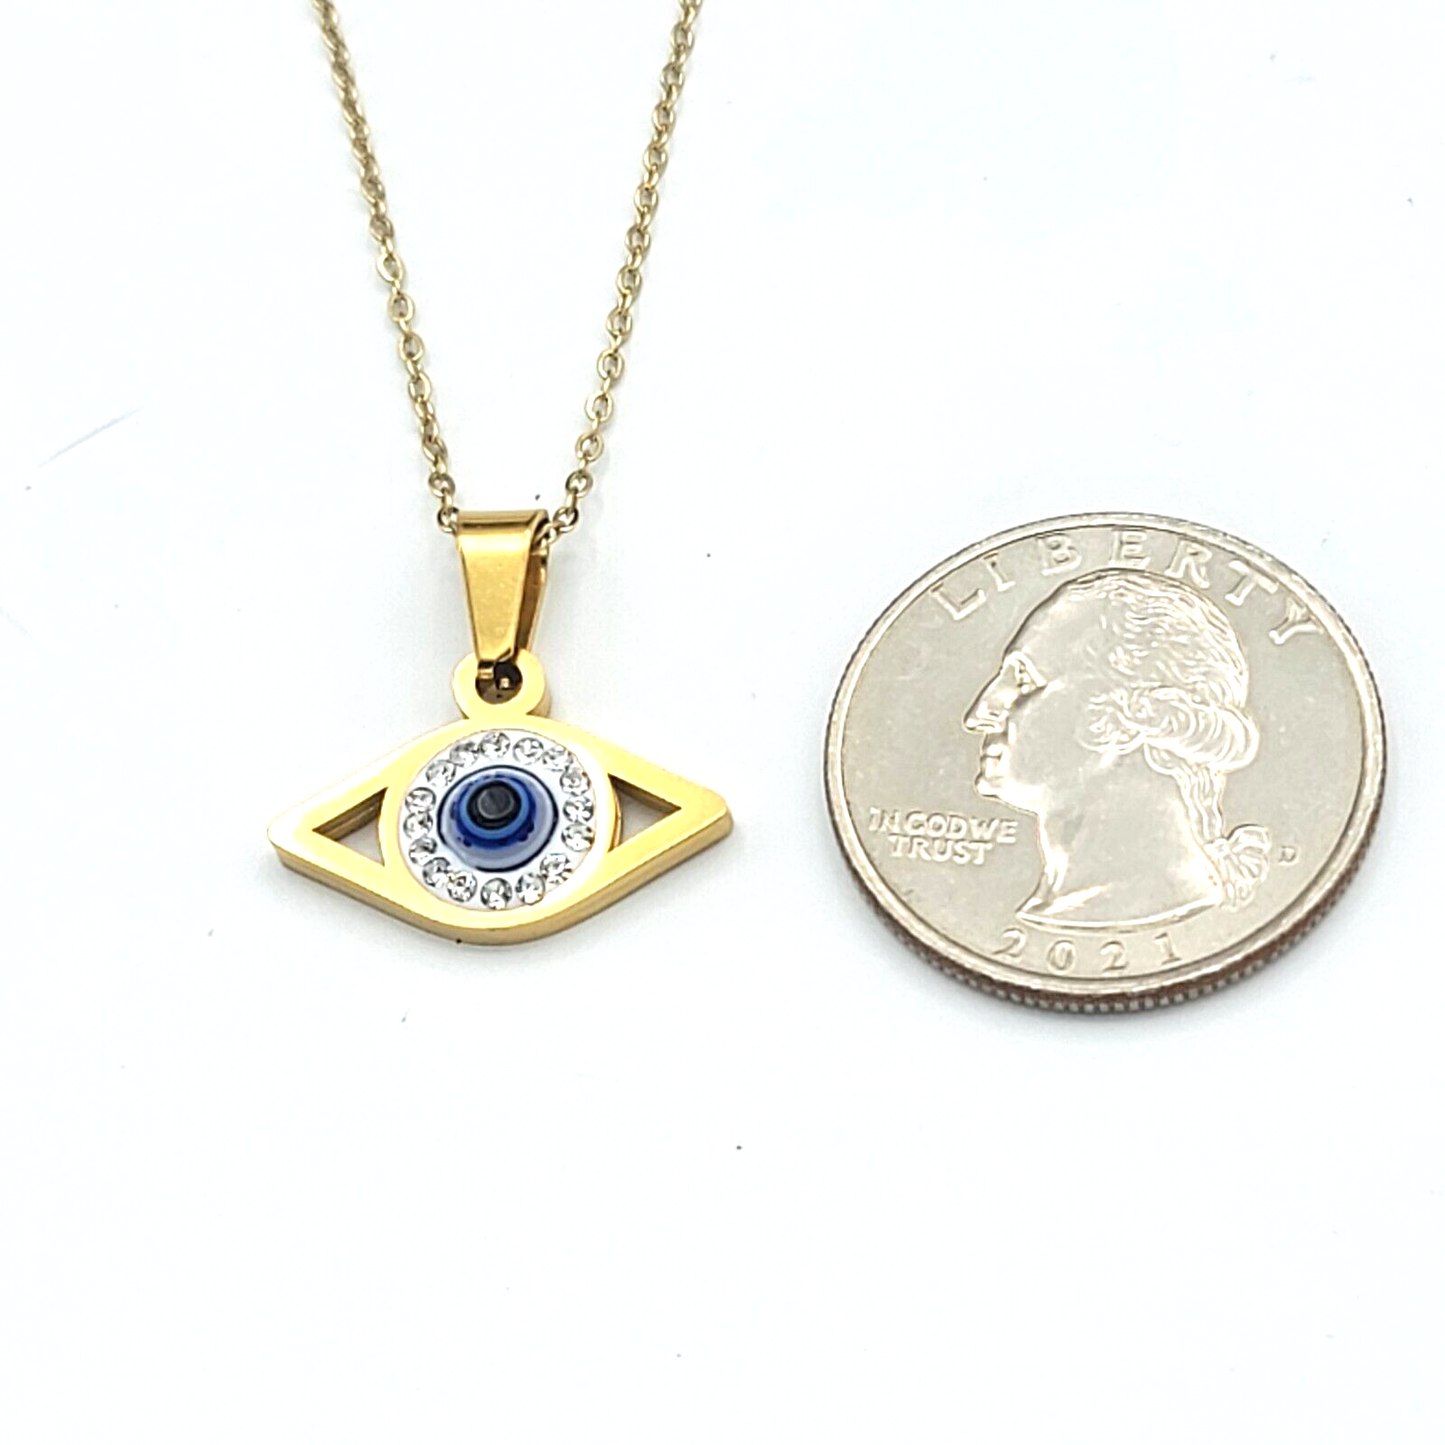 Necklaces - Stainless Steel Gold Plated. Blue Black Eye Pendant & Chain.